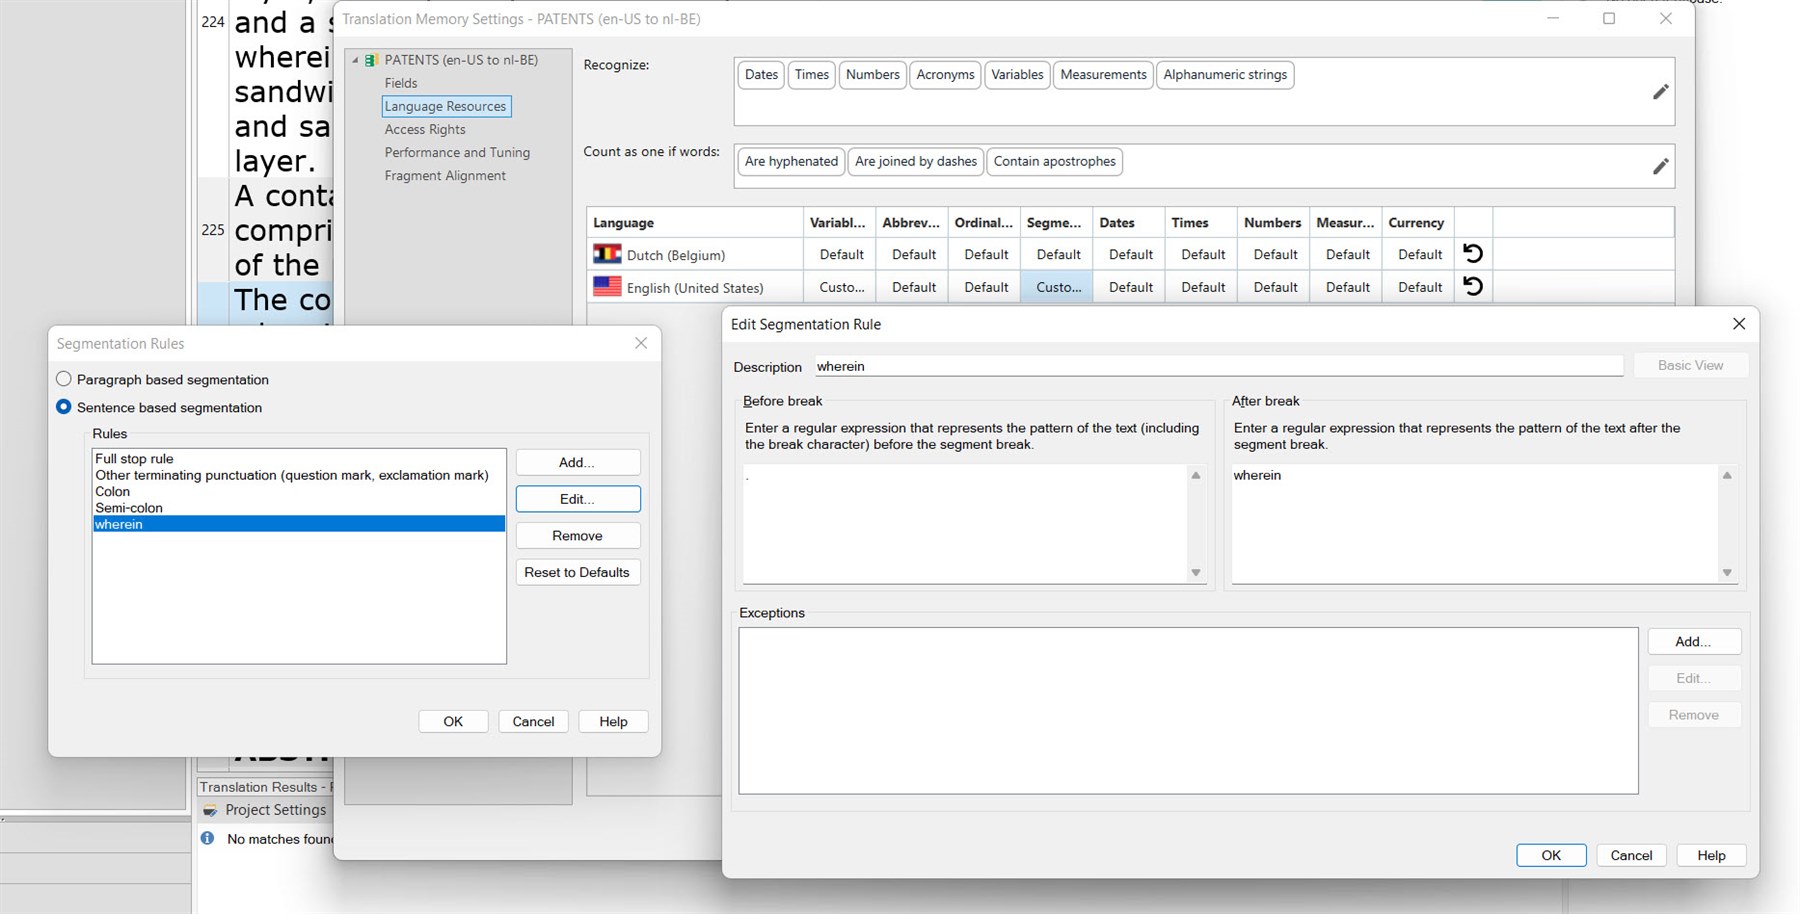 Trados Studio screenshot showing the Segmentation Rules dialog with a custom rule added for the word 'wherein'. The rule is highlighted, and the Edit Segmentation Rule window is open with 'wherein' entered in both Before break and After break fields.